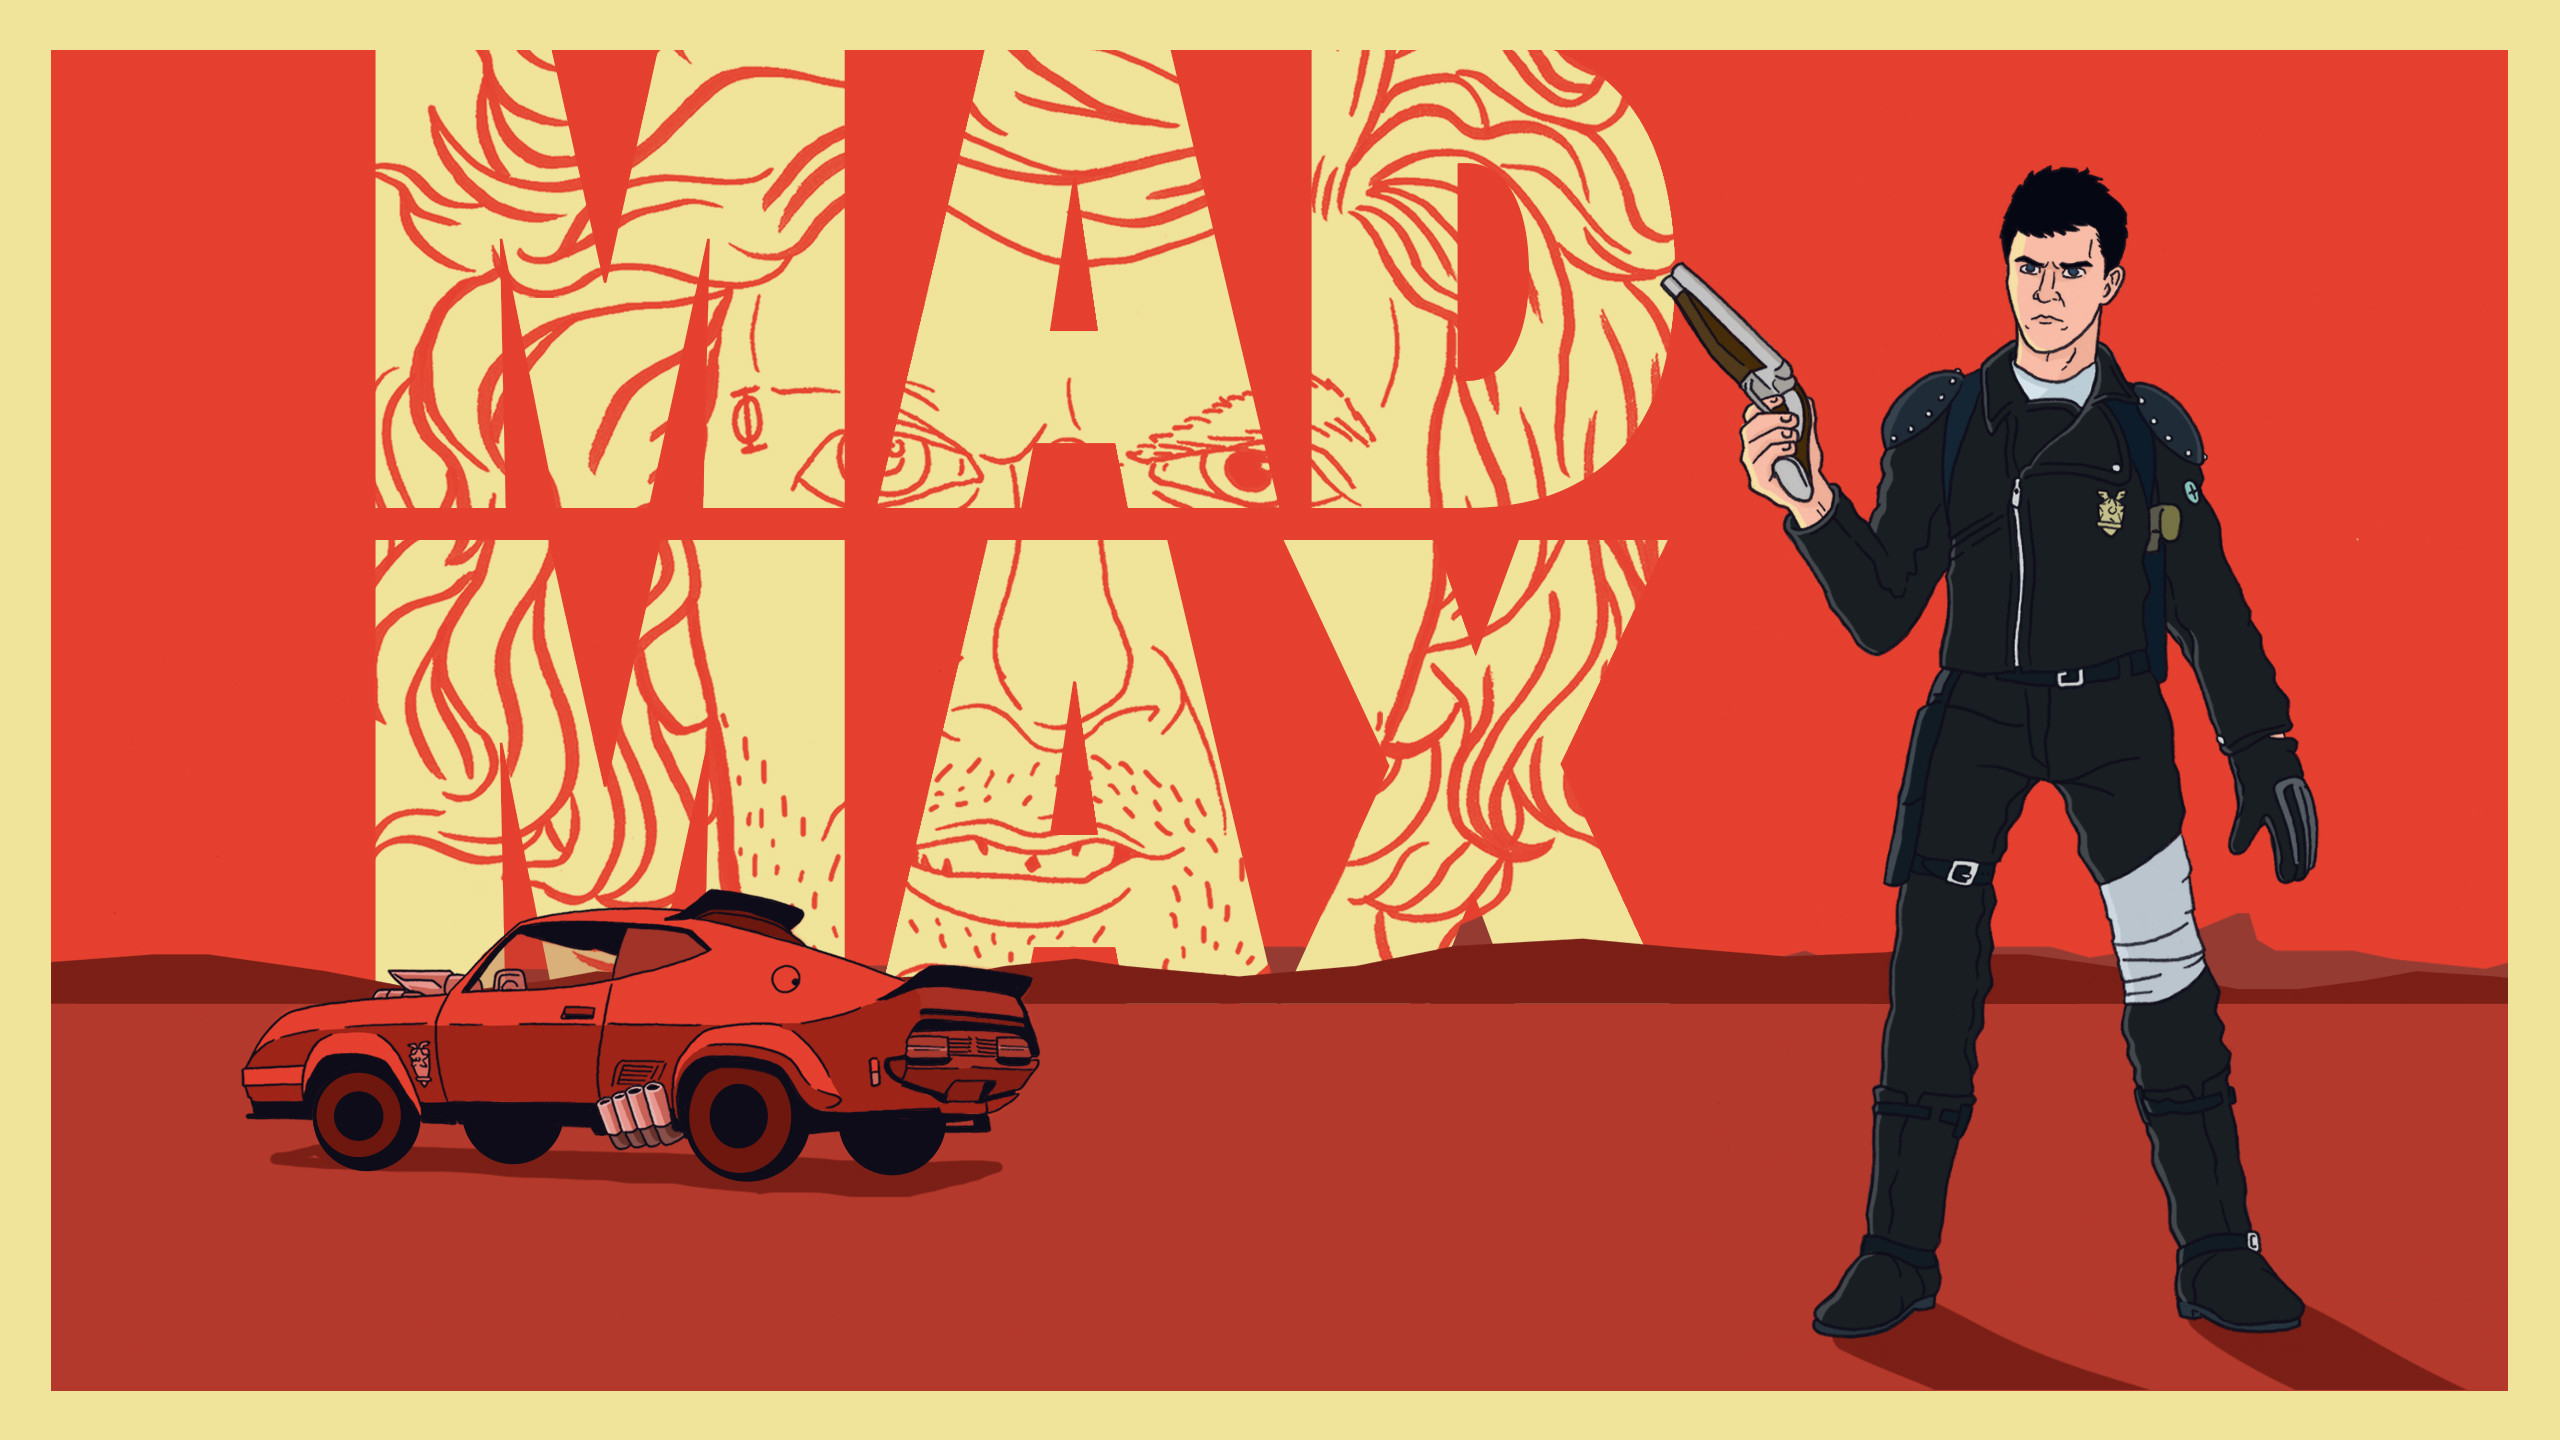 2560x1440 Source: http://www.shirts.com/blog/p-705-mad-max-primer-infographic.aspx Mad  Max, Road Warrior, Beyond Thunderdome, and Fury Road posters / wallpapers